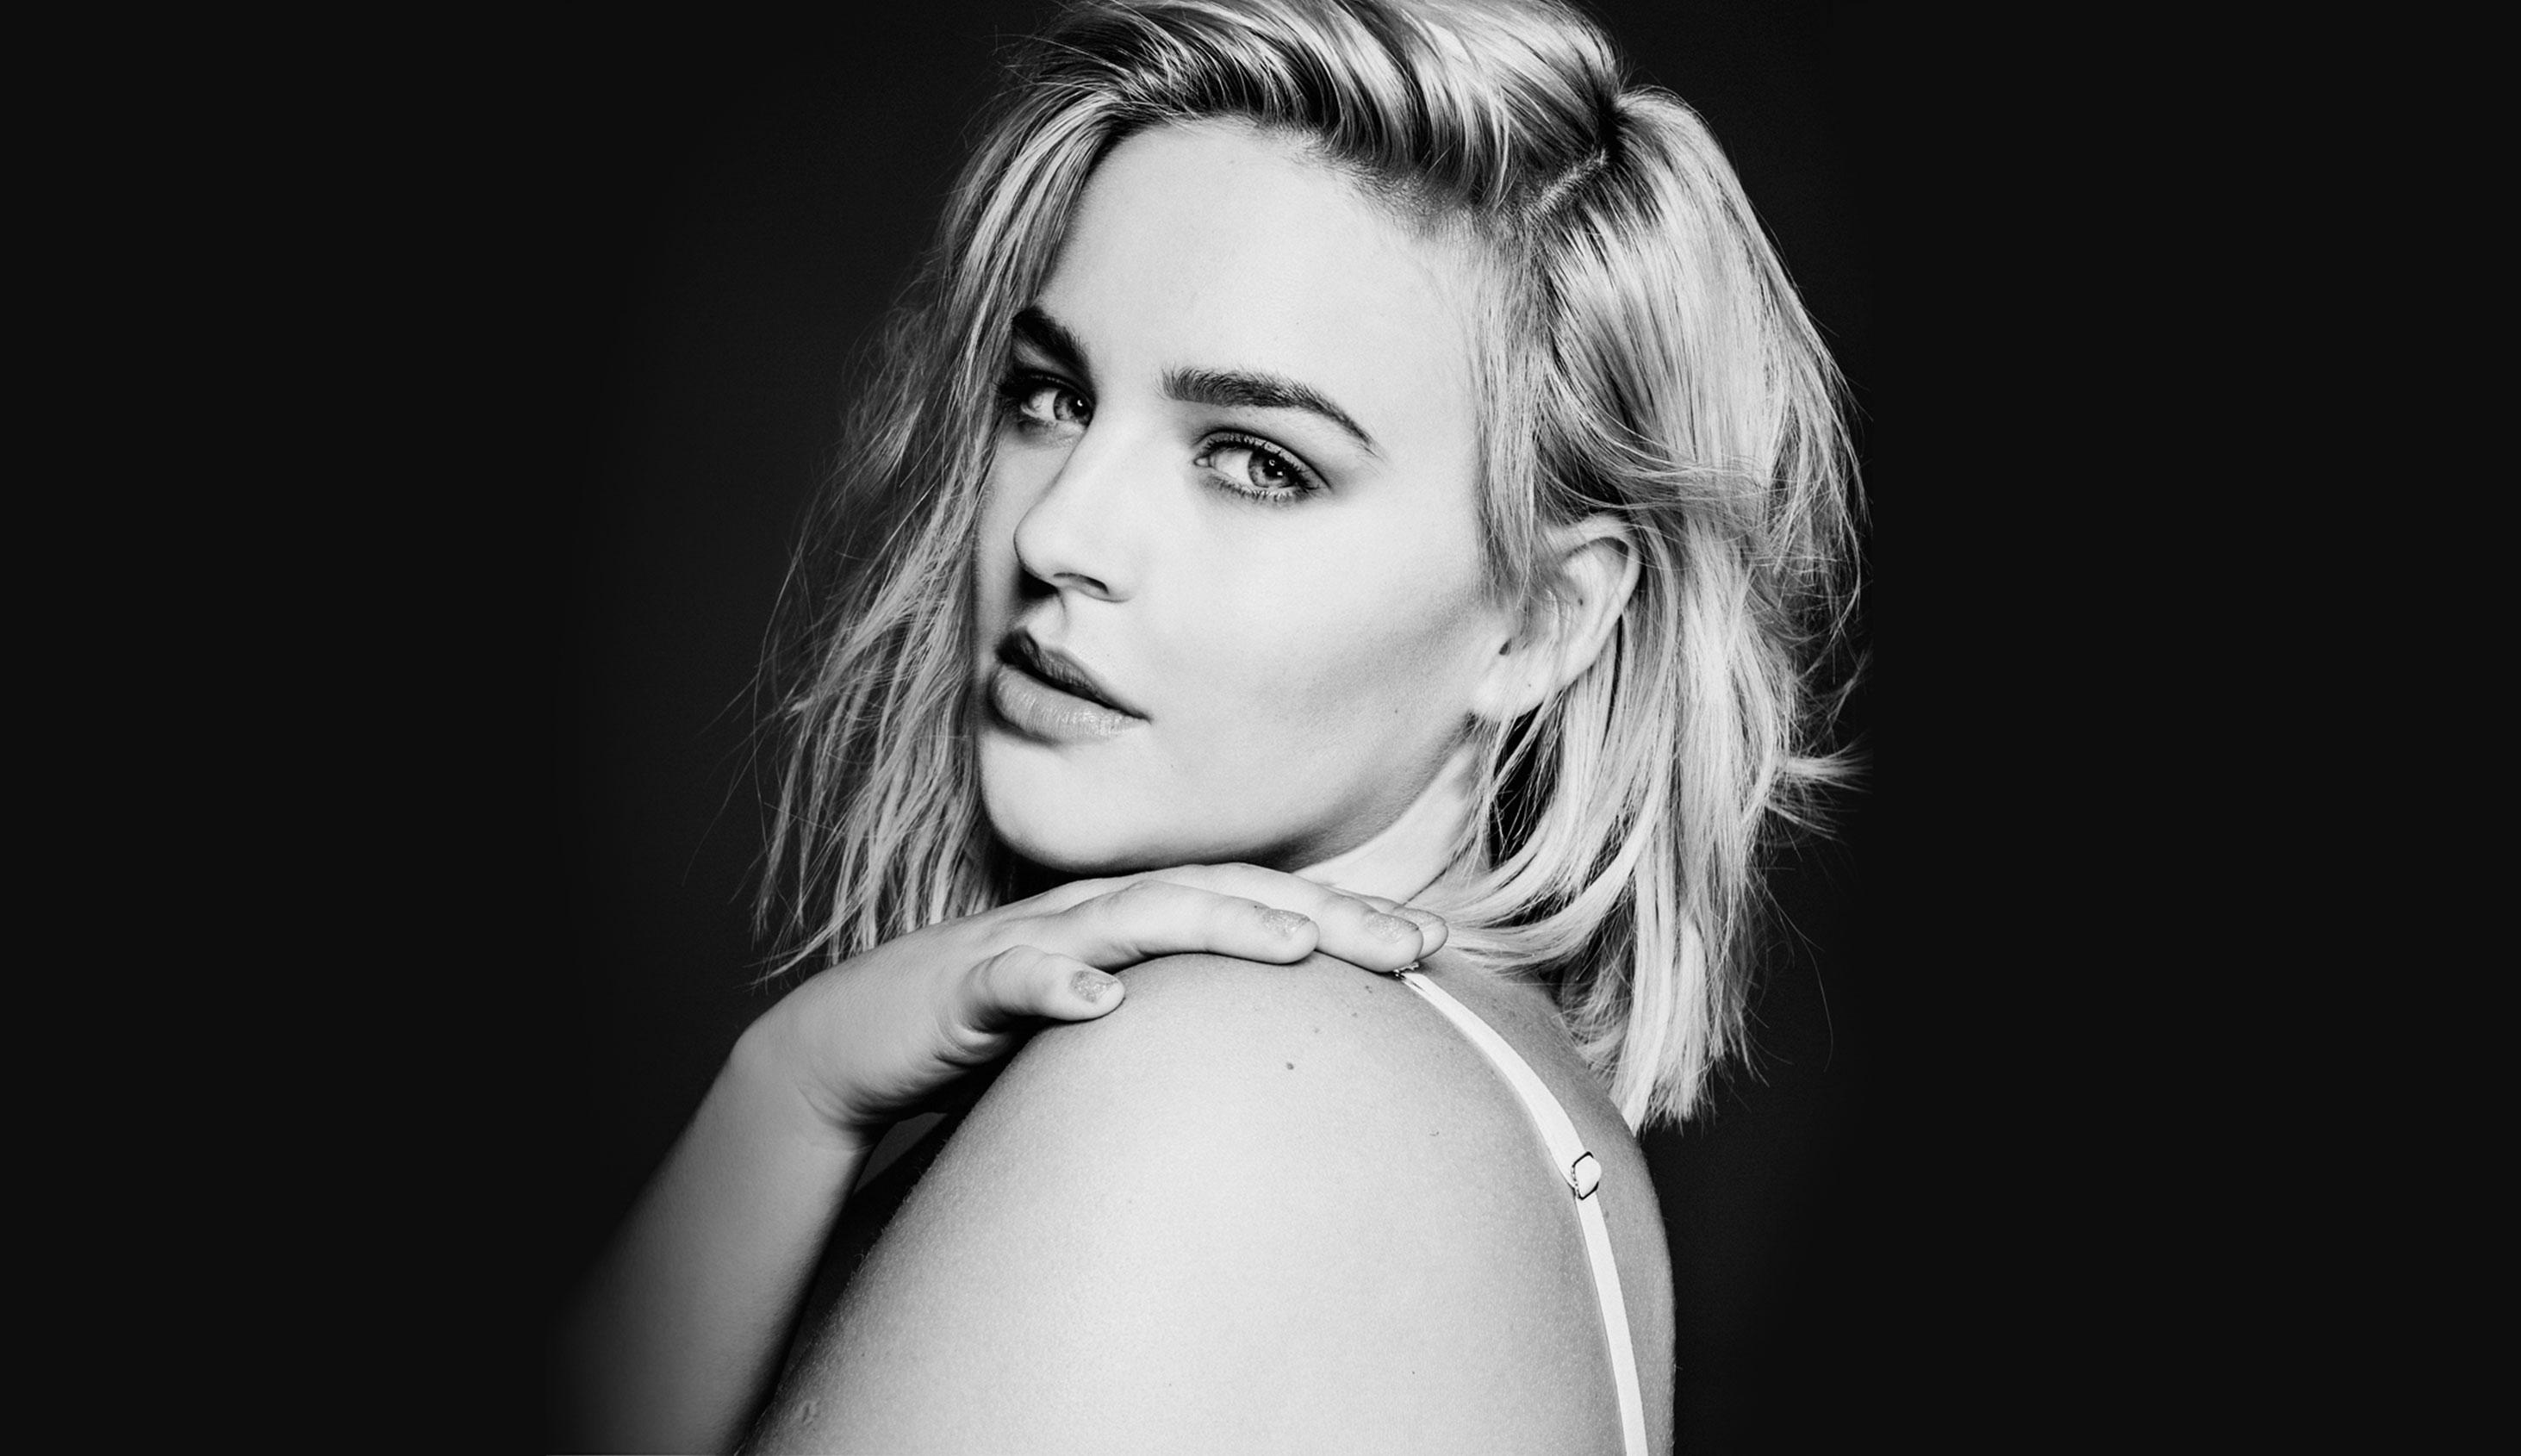 Anne Marie. New Single 'Friends' Out Now. The Official Website